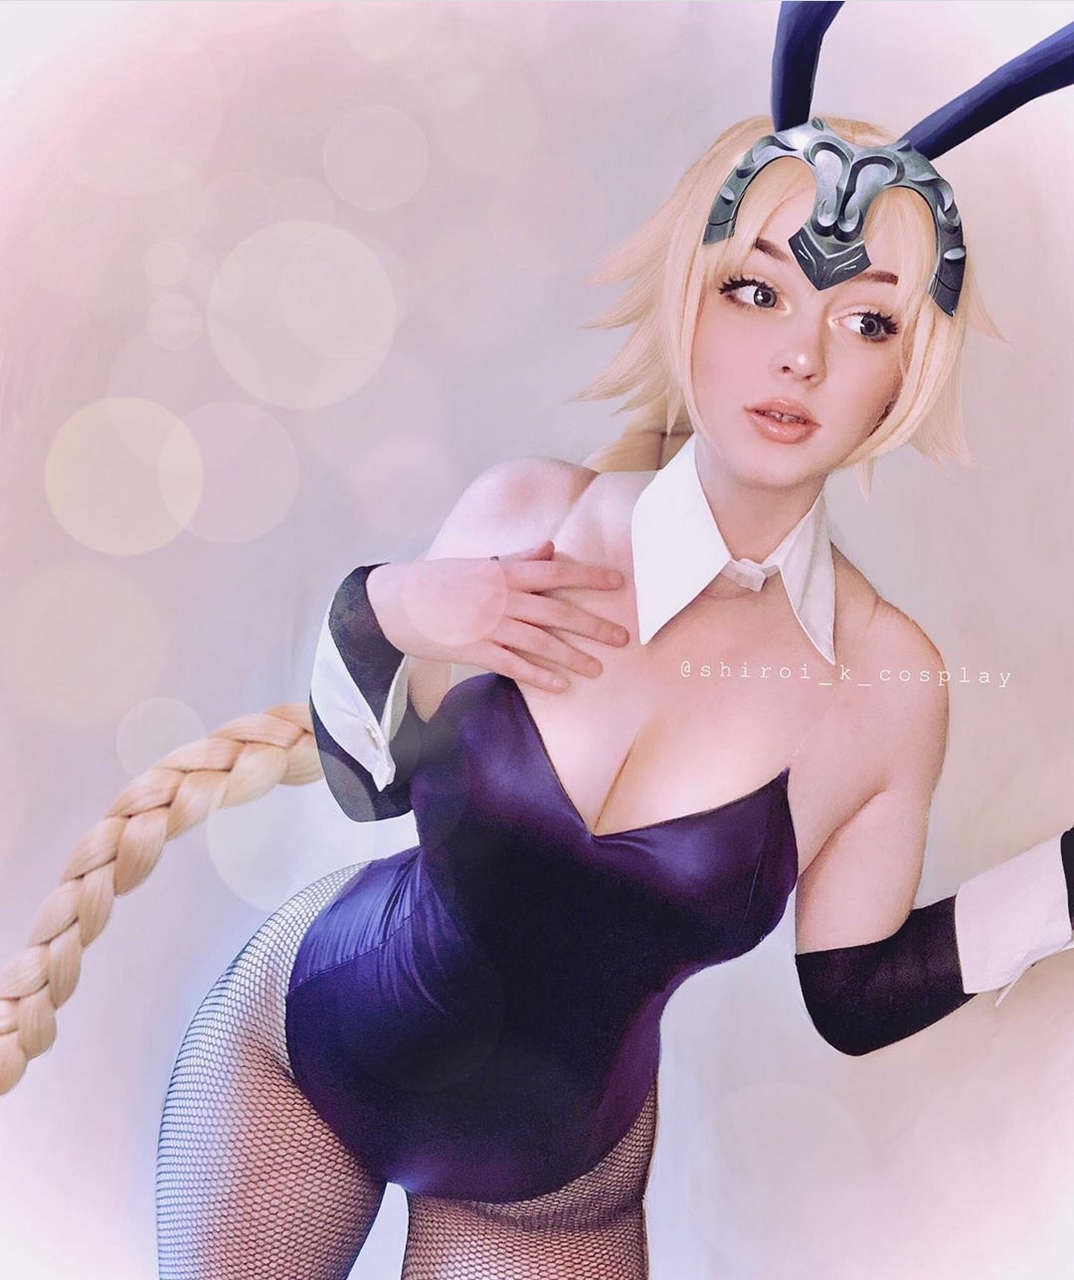 Shiroi K Cosplay As Bunny Saber Is Just So Stunning Not M